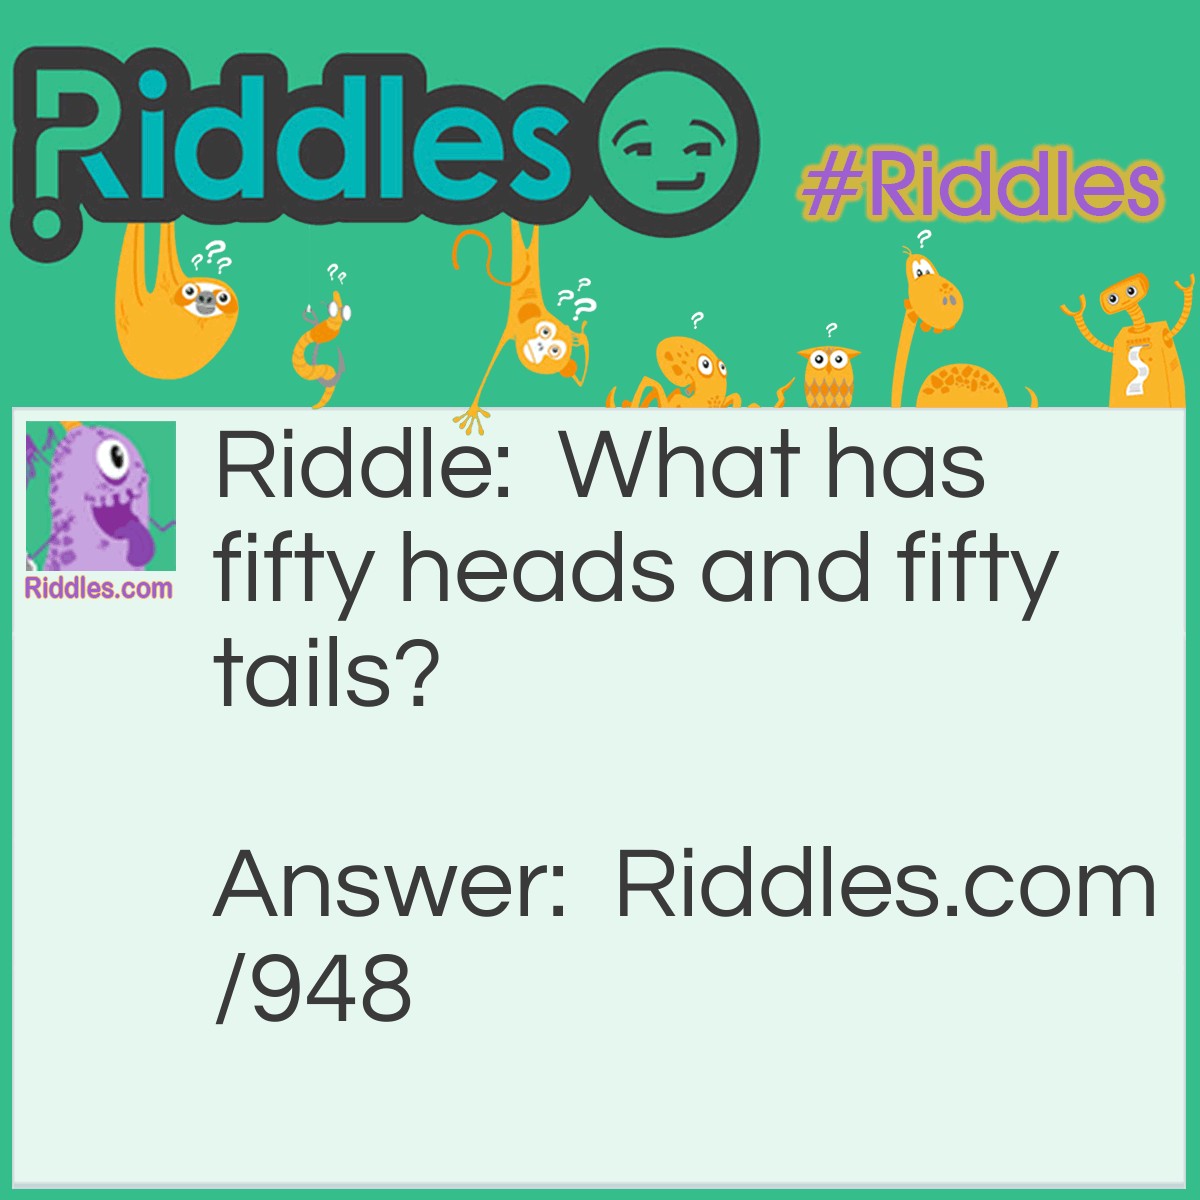 Riddle: What has fifty heads and fifty tails? Answer: Fifty pennies or coins.